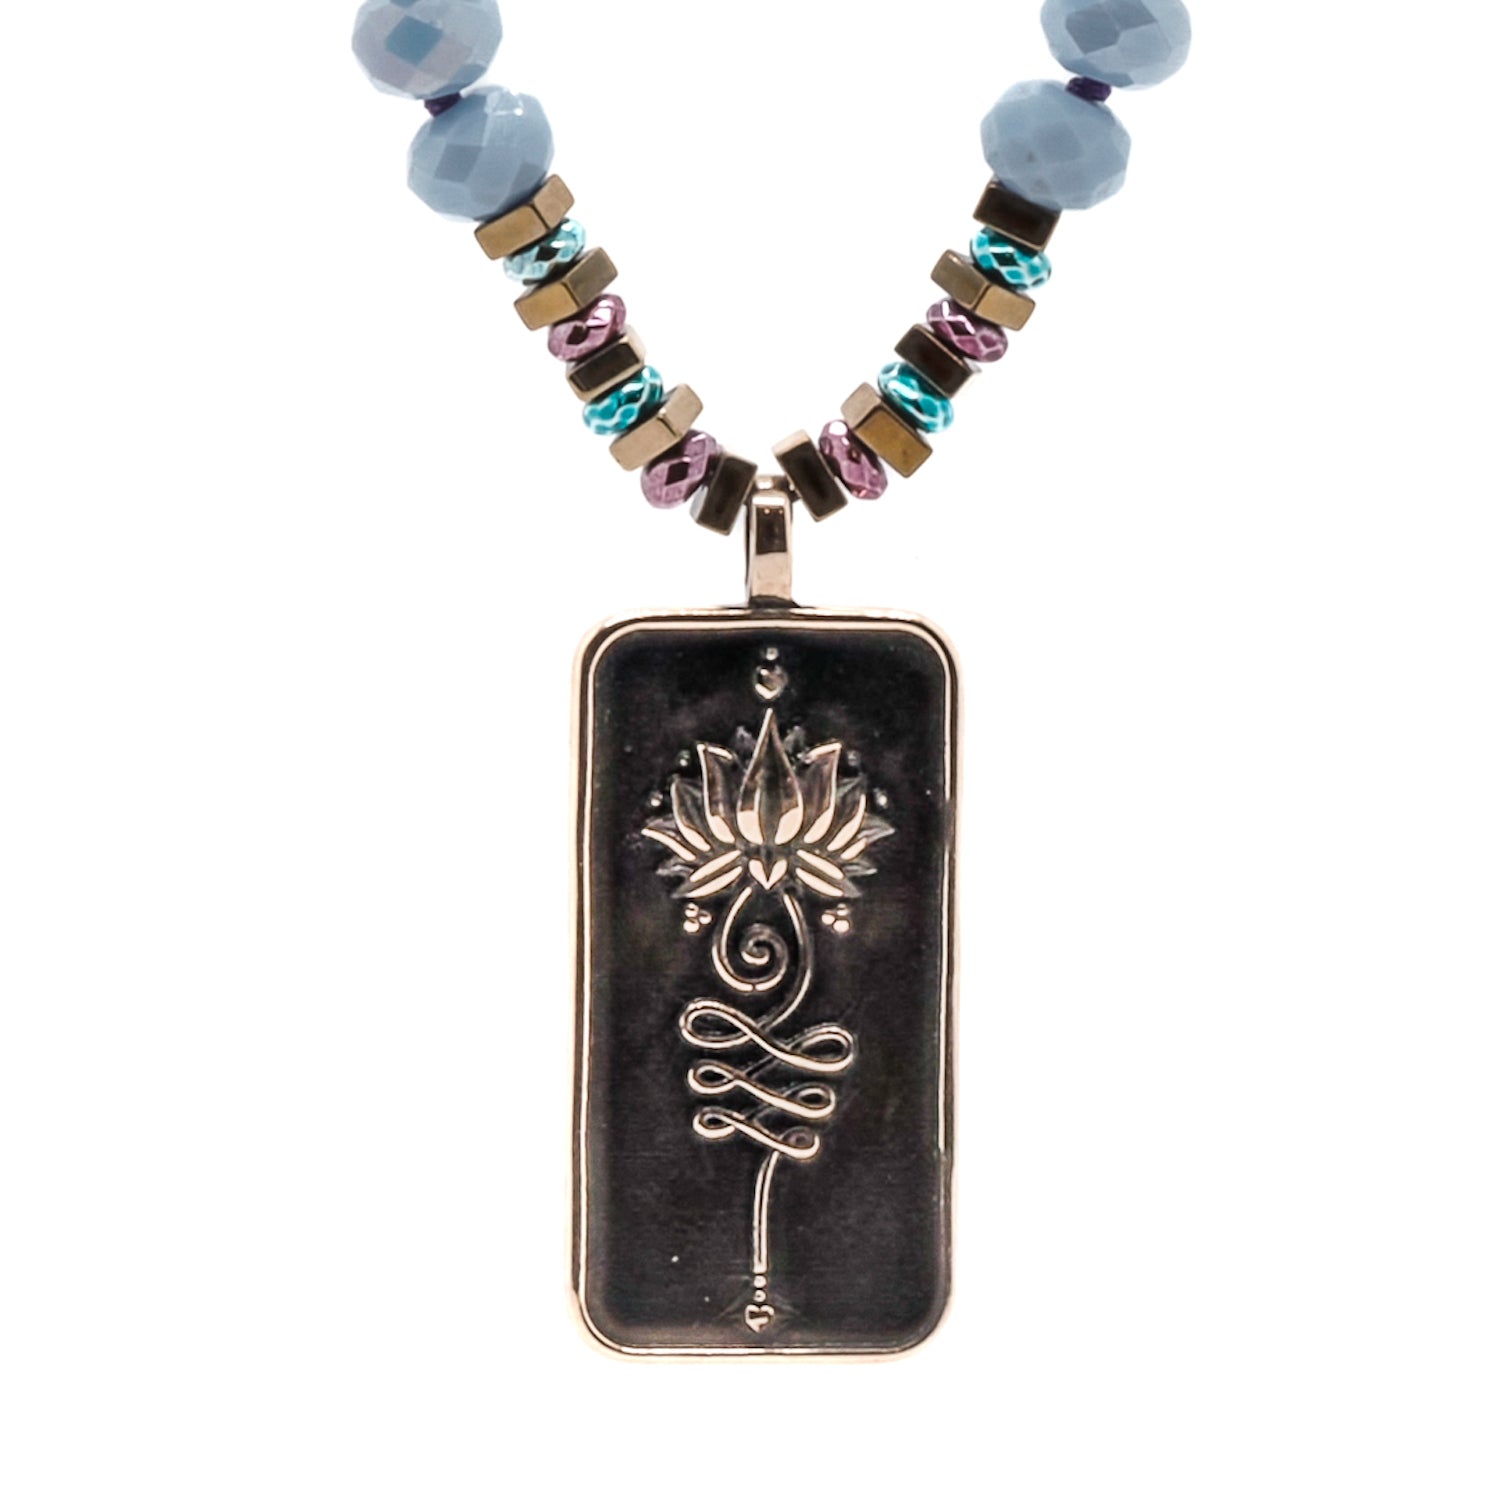 Embrace Self Worth - The Handmade Necklace Reminds You of Your Value and Inner Light.